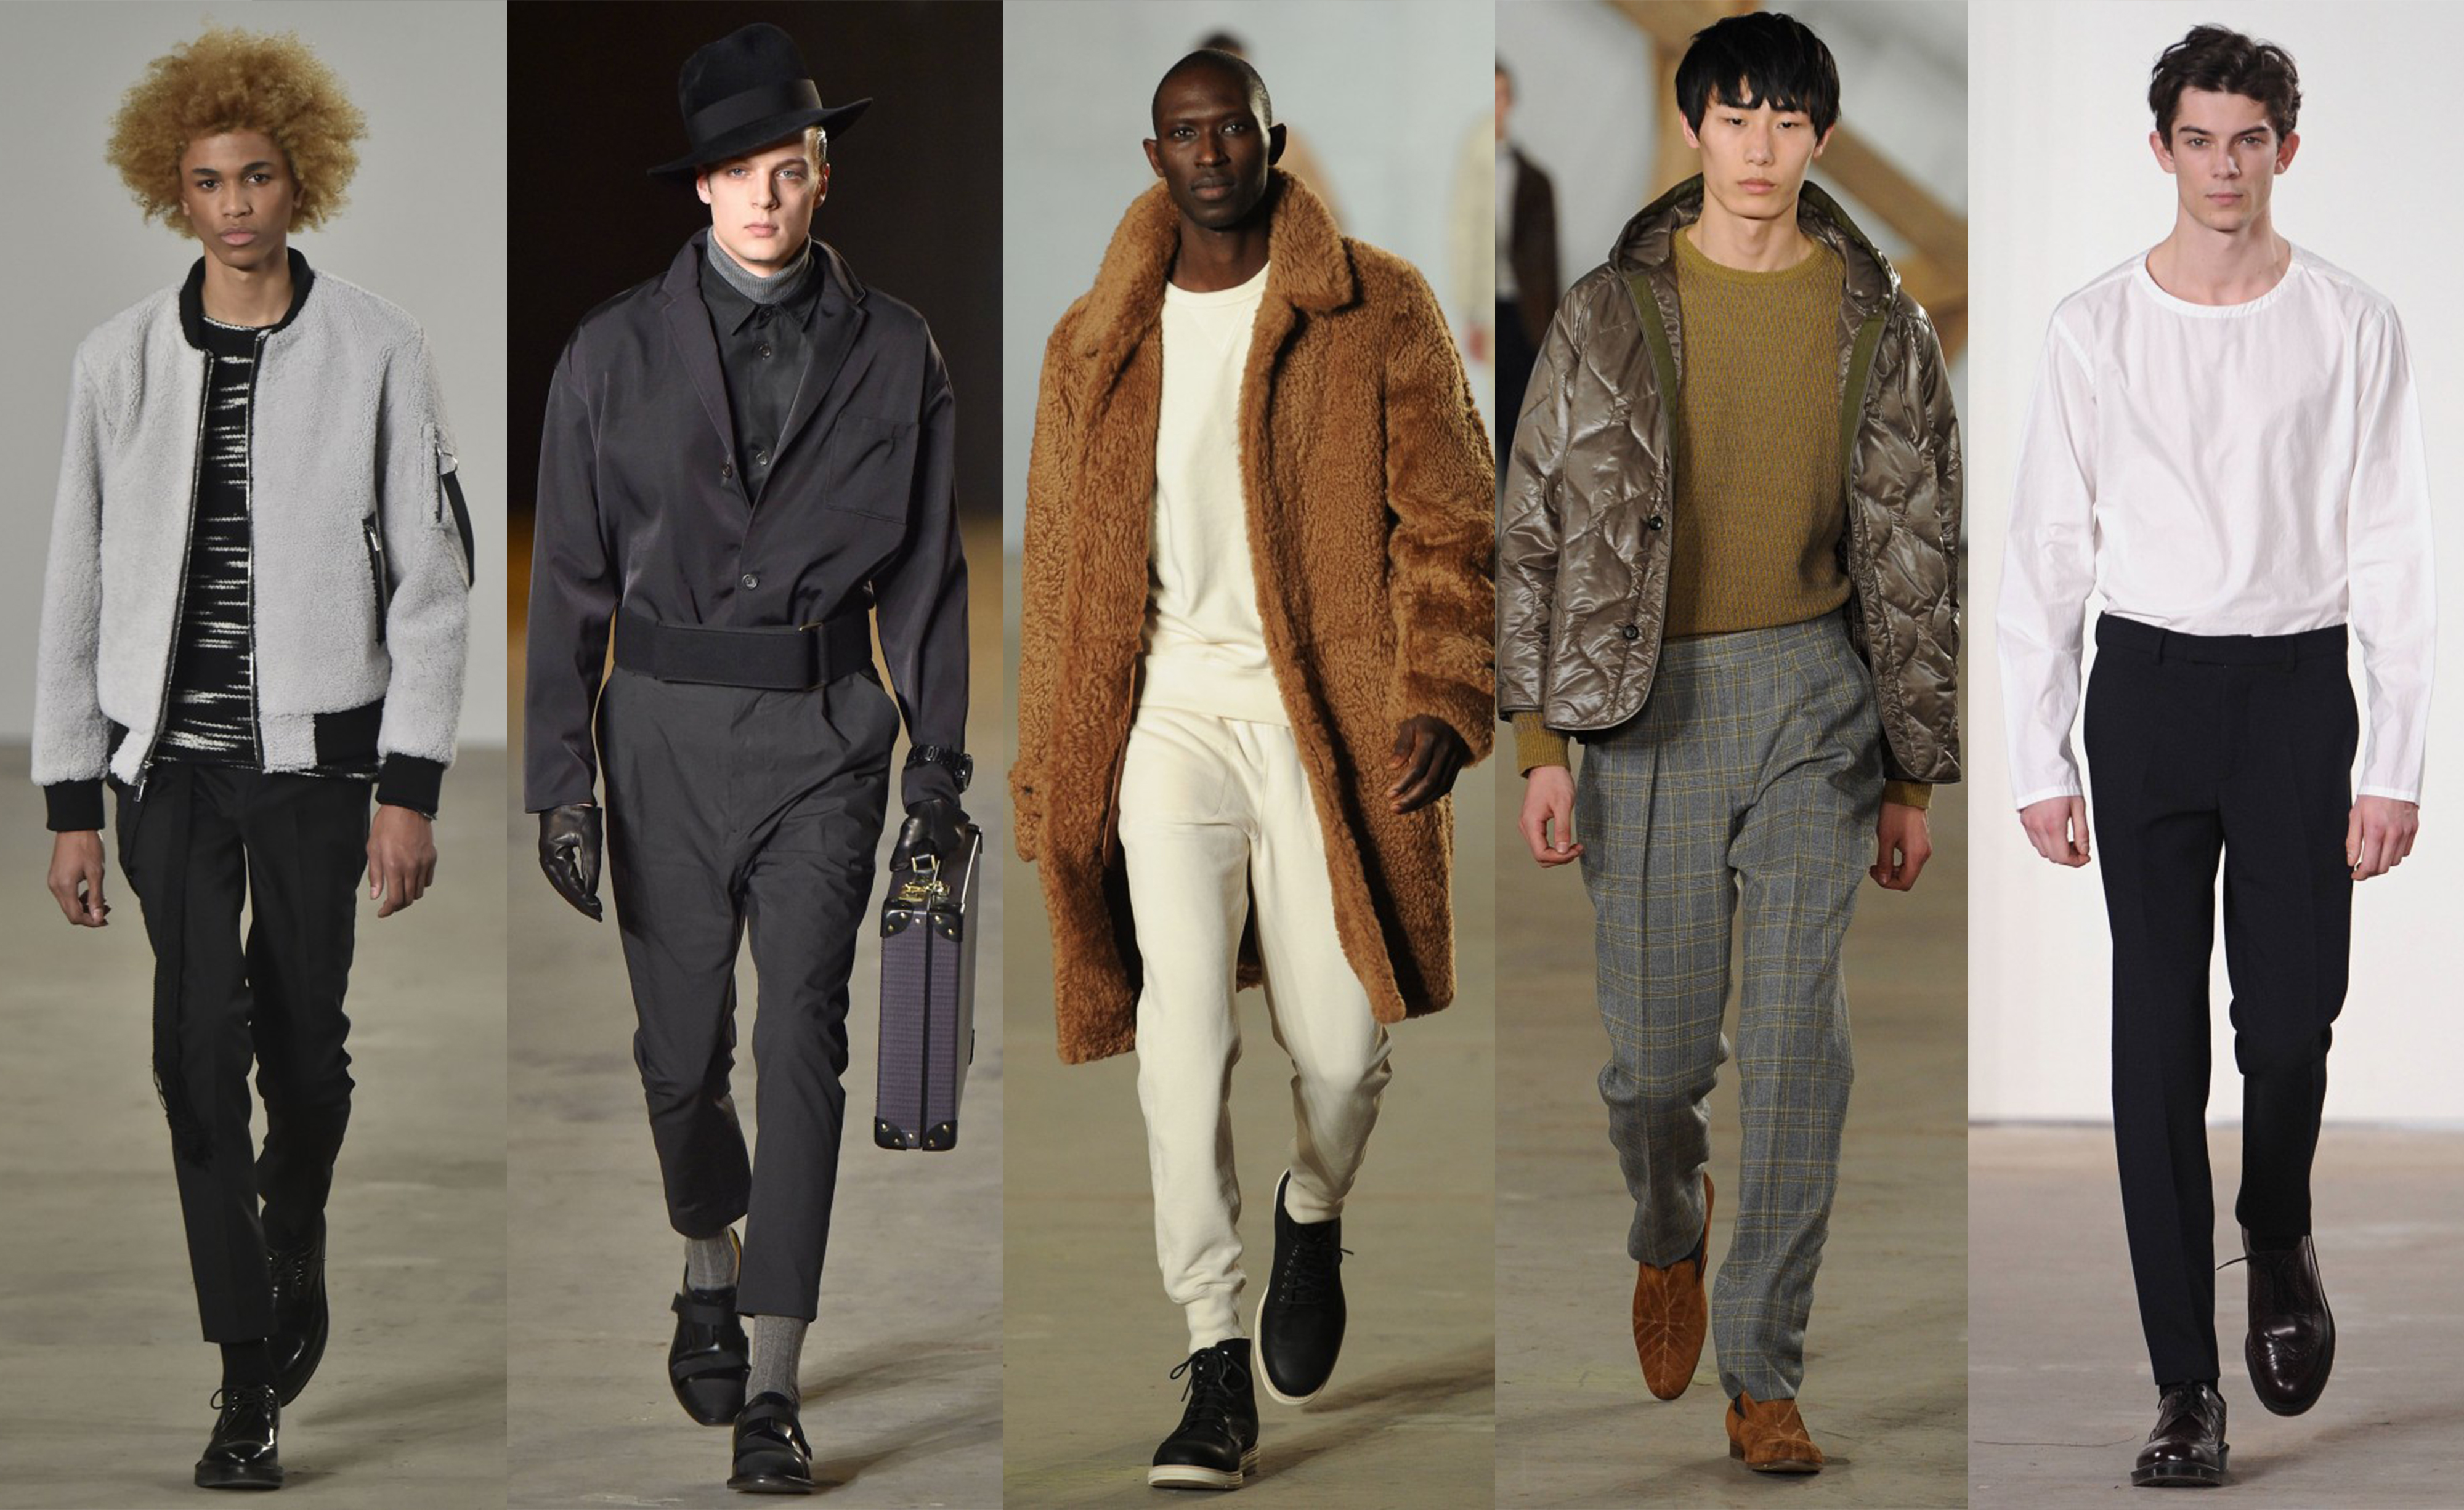 LIFE LESSONS ACCORDING TO MEN’S FASHION WEEK